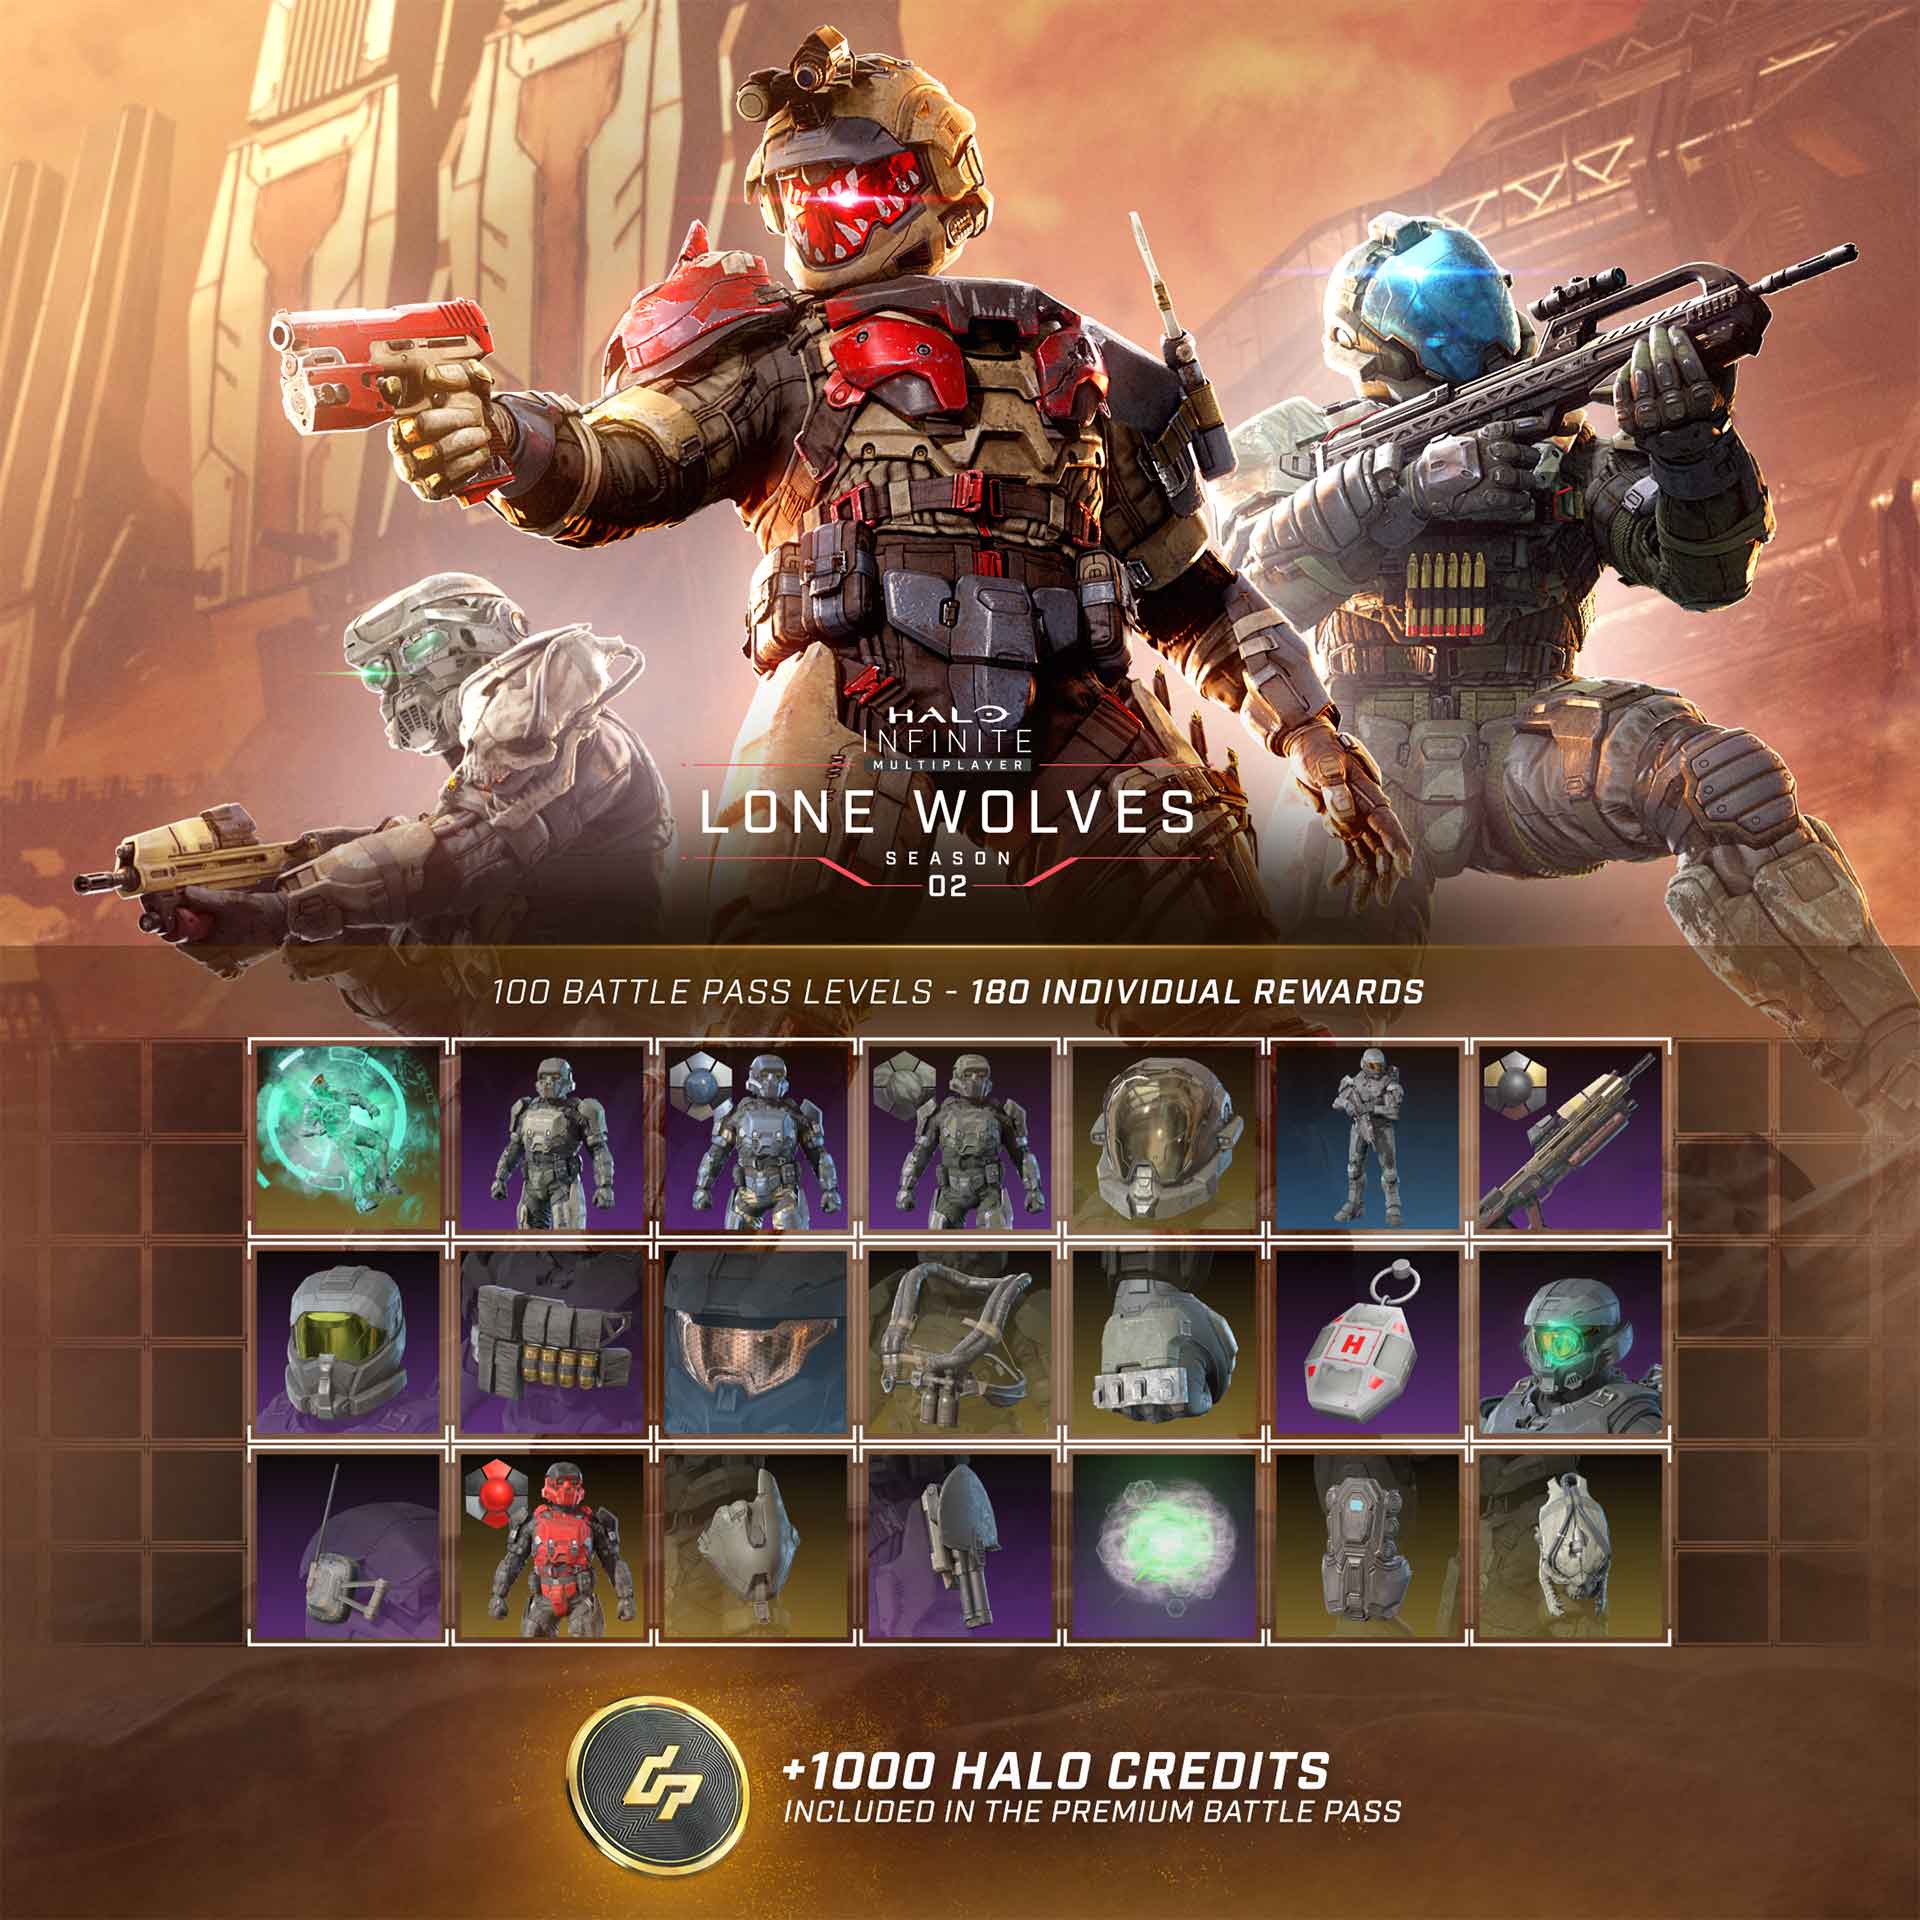 A summary of some of the Season 2 Battle Pass items with a call out that the Premium Battle Pass includes one thousand Halo Credits and 180 individual rewards spread over 100 tiers.